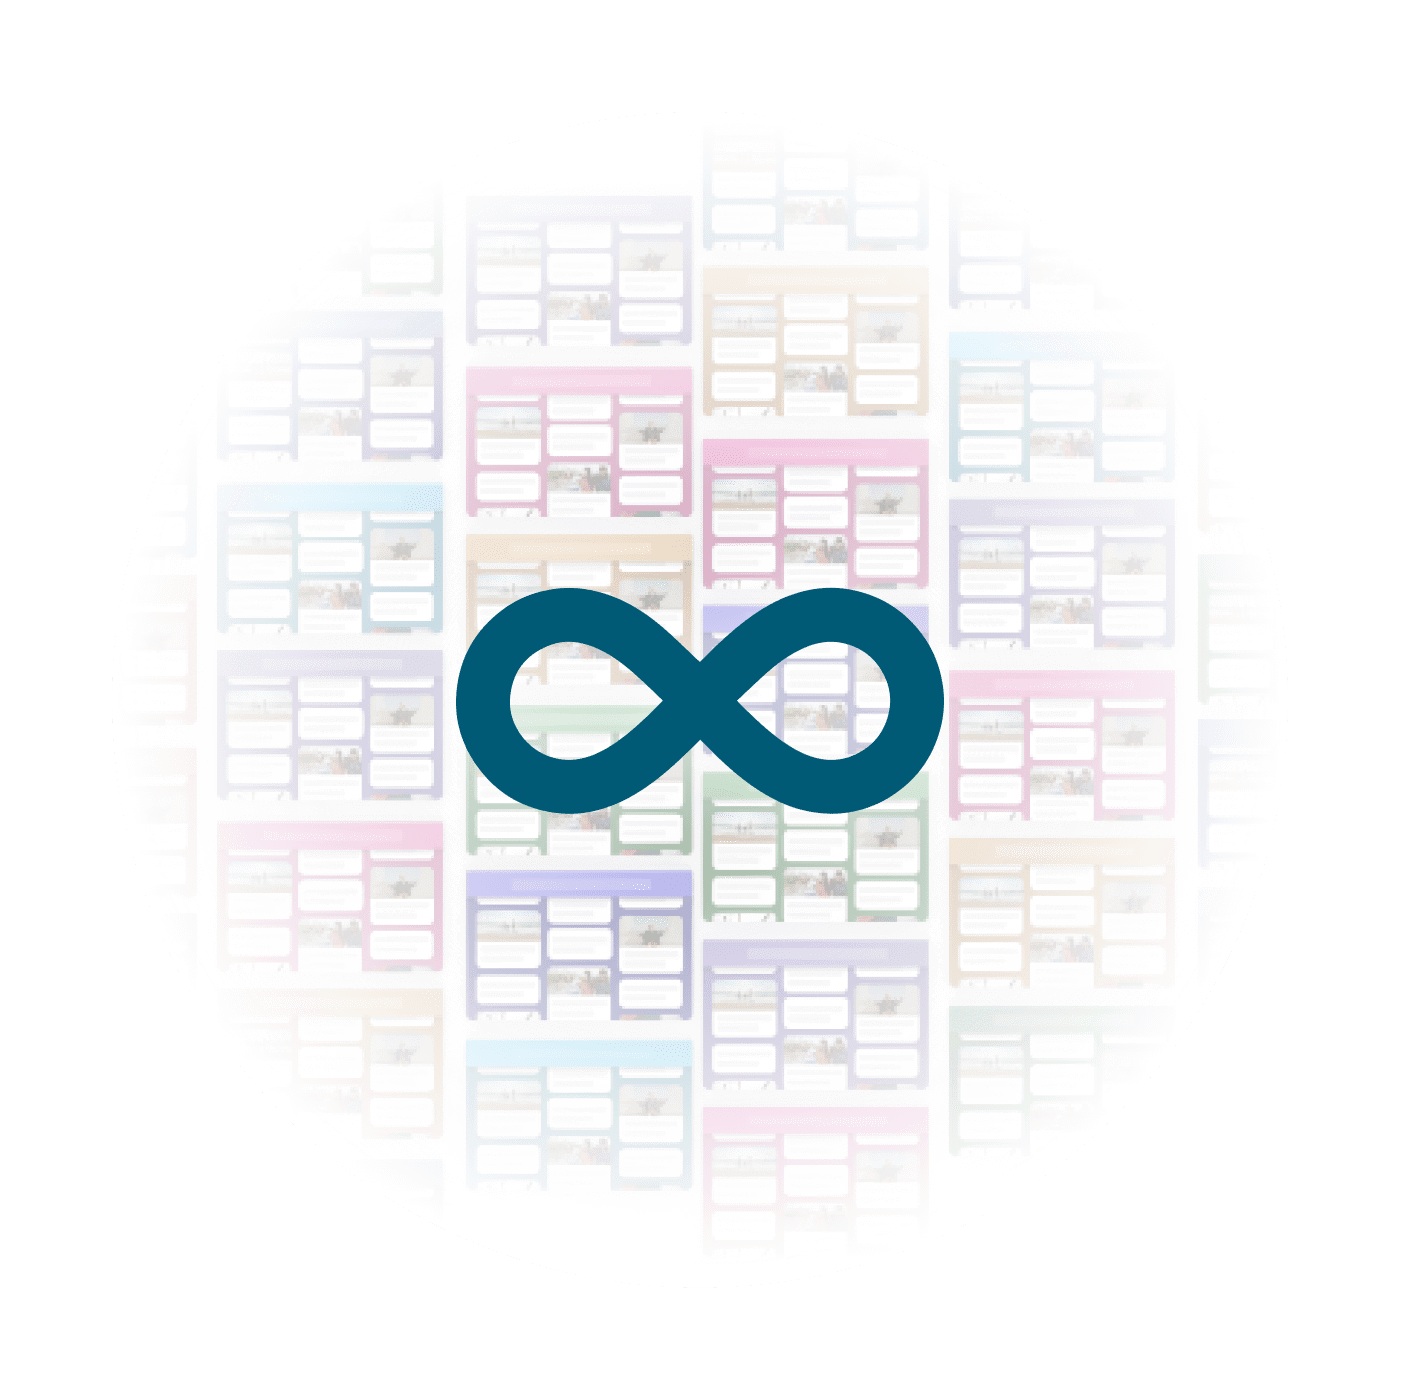 infinity sign with backgrounds of Kudoboards